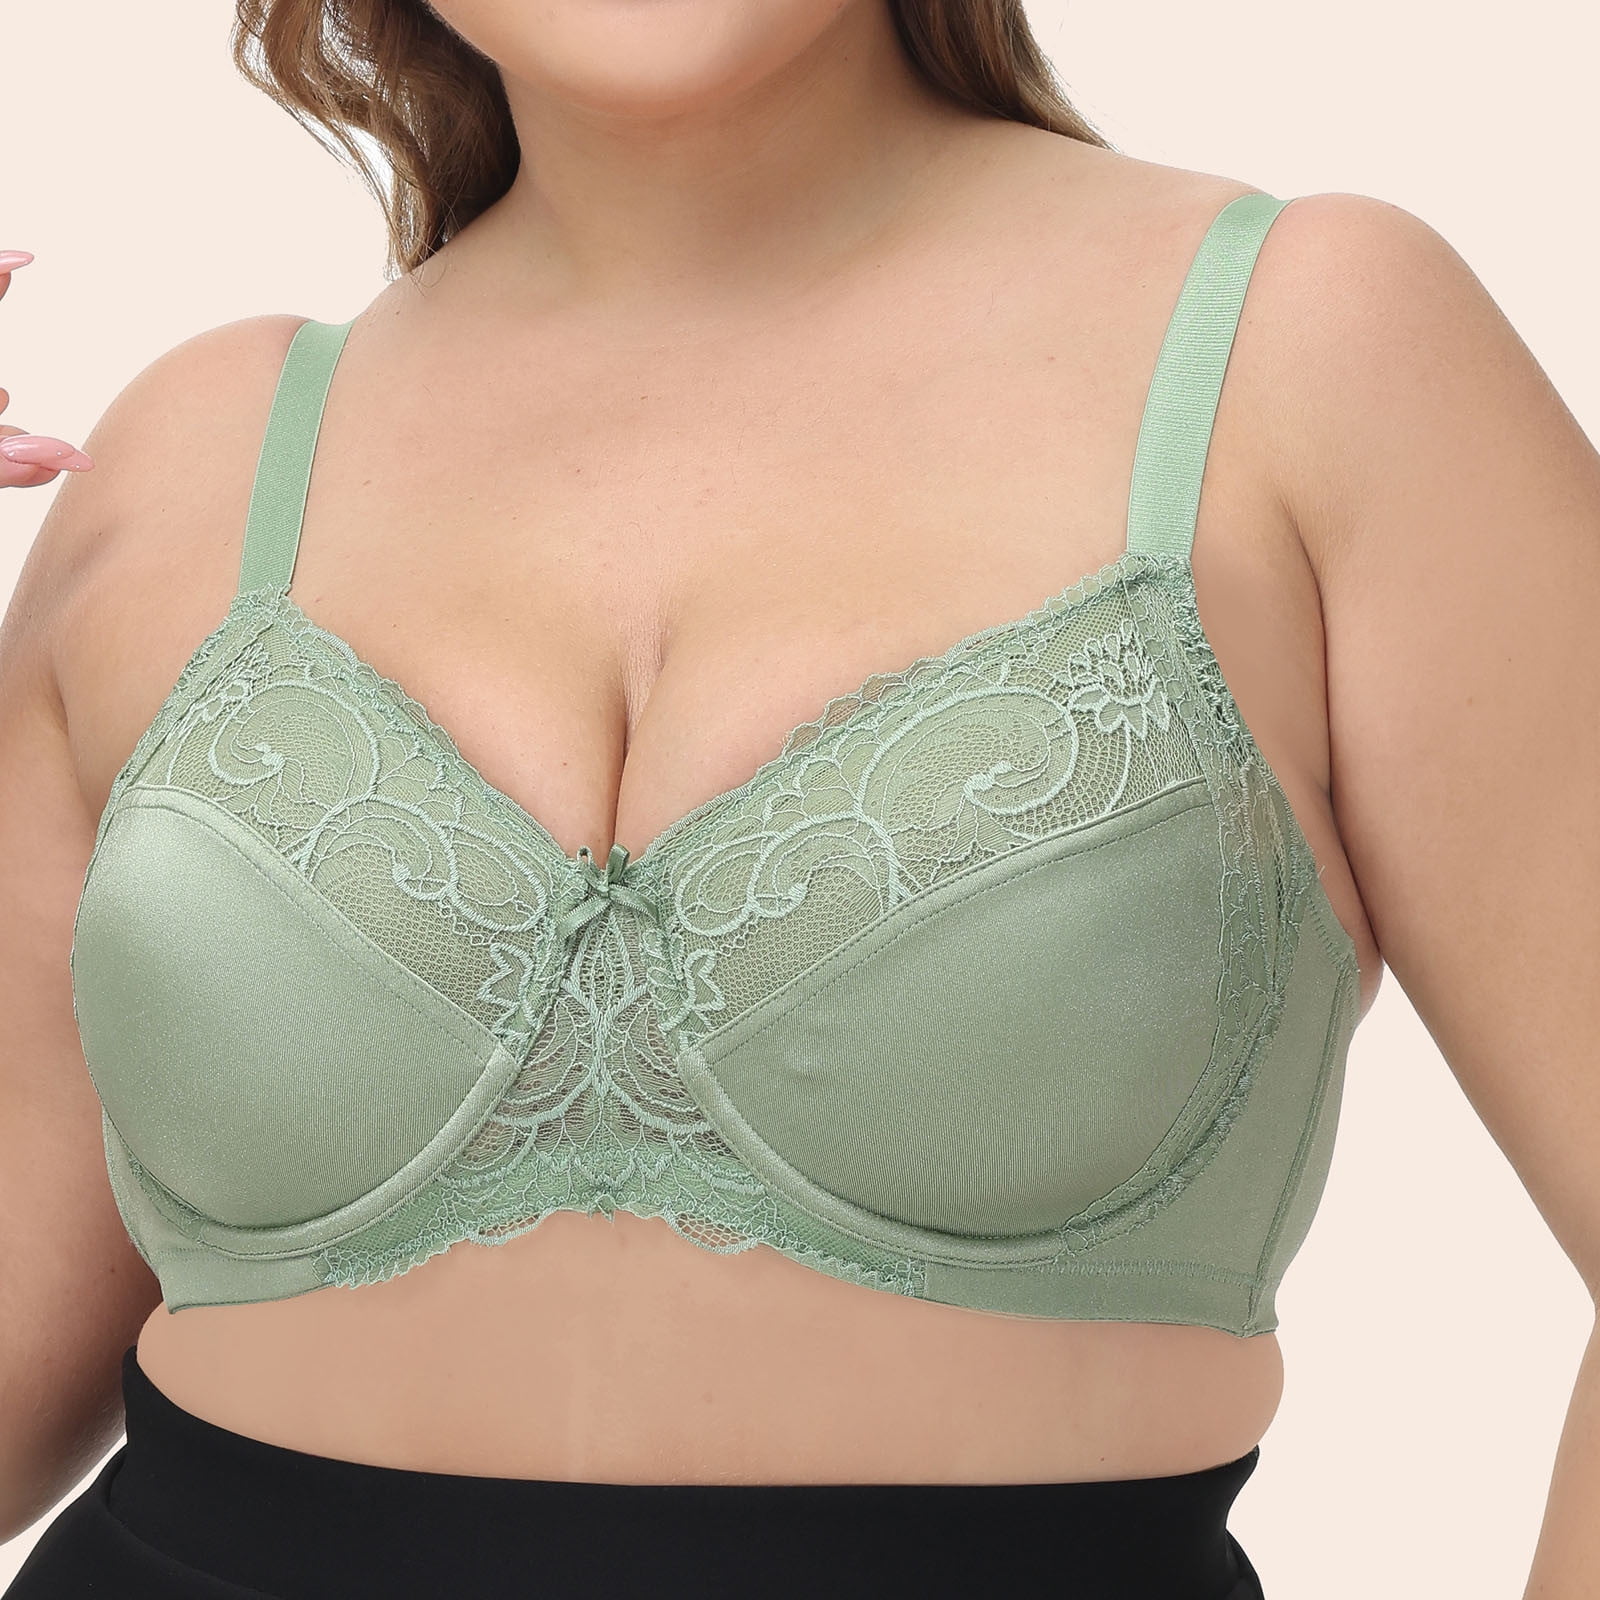 Womens' Wireless Full-Coverage Oversize Bra Seamless Push Up Lace Sports Bra  Comfortable Breathable Base Tops Underwear Present for Women 50% off  Clearance 